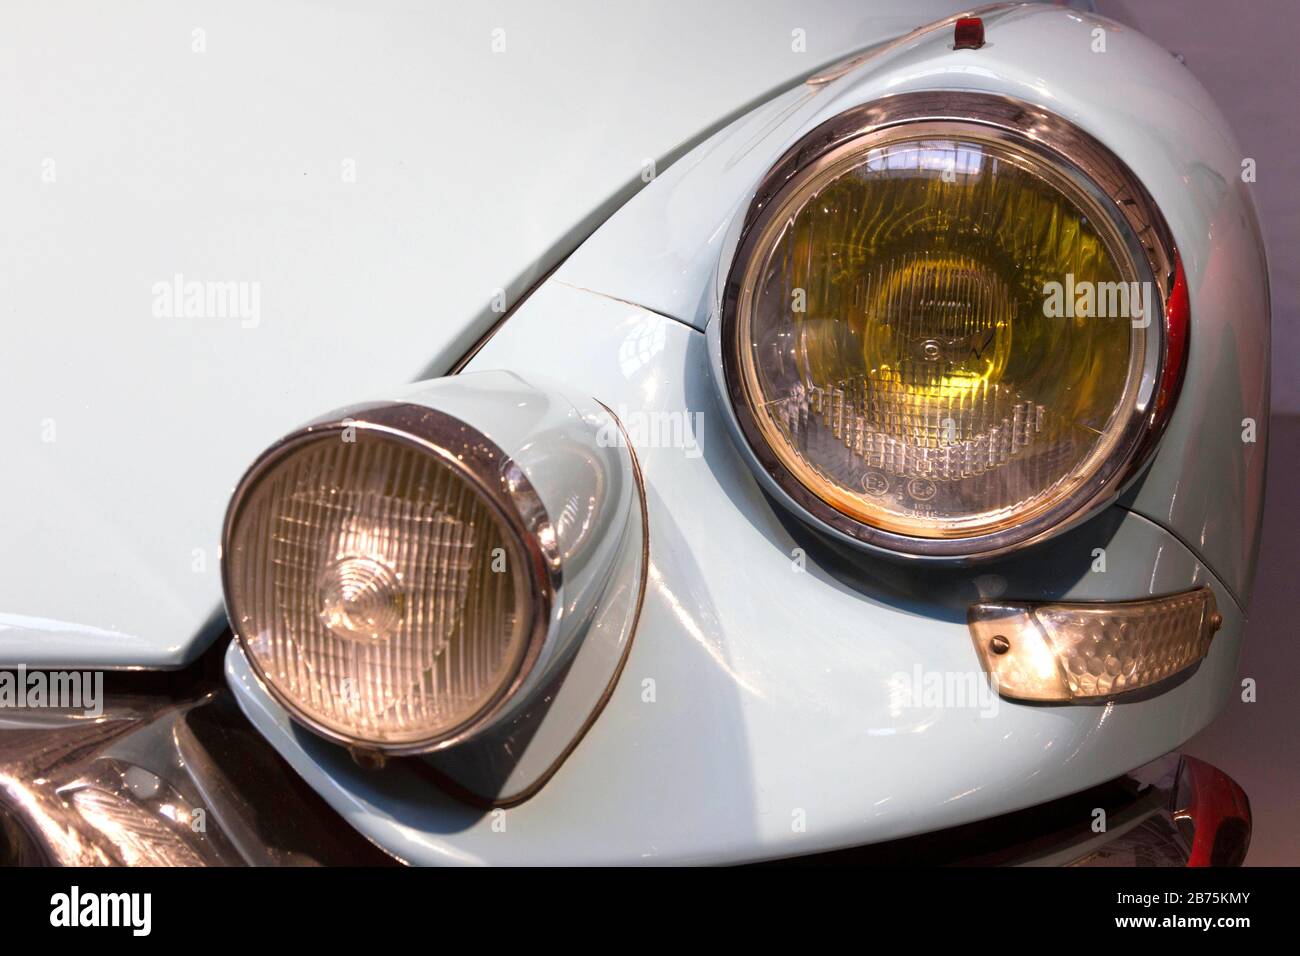 The front headlights of a Citroes DS 19 can be seen in the exhibition of the German Museum of Technology 'Umgeparkt - Autos aus dem Depot' on 05.12.2017 in Berlin. The German Museum of Technology has more than 200 historic old-timer cars. Only about 30 of them are permanently on display in the 'Mensch in Fahrt' exhibition, the other vehicles are in the museum depot. Due to reconstruction work in the depots, there is now the opportunity to briefly see 29 more vehicles from the collection in the Museum of Technology. [automated translation] Stock Photo